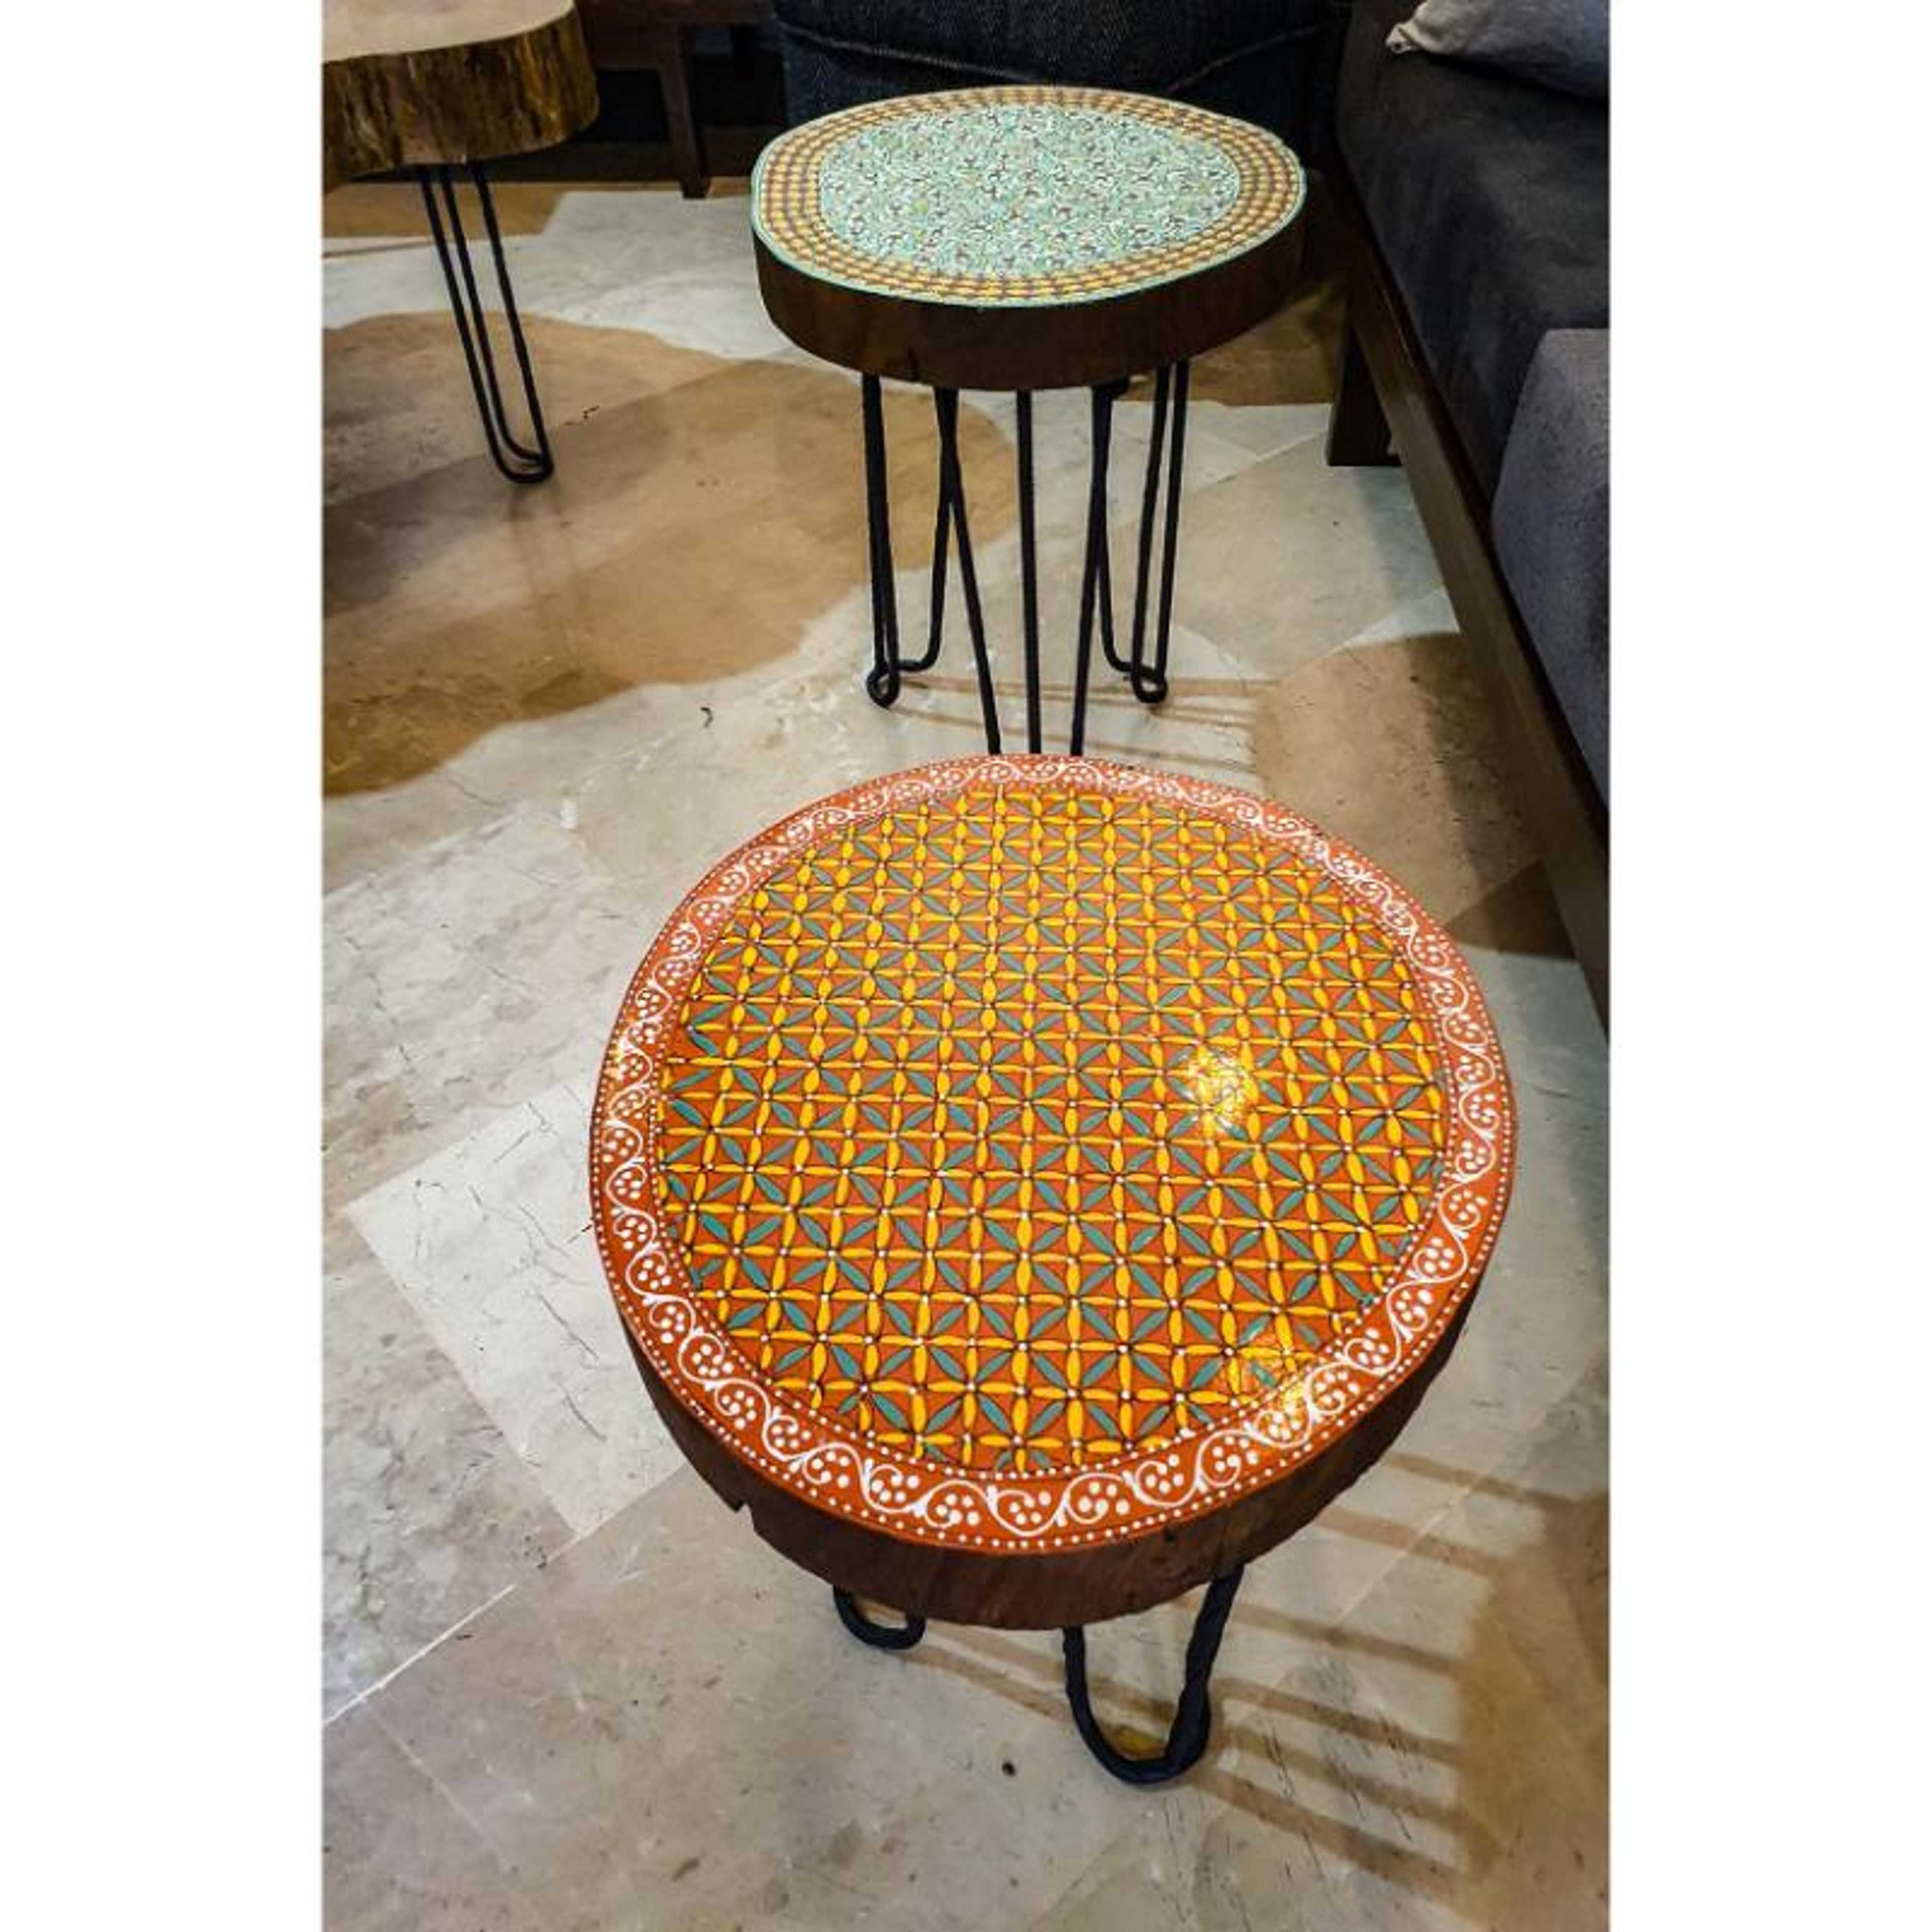 MORO HAND PAINTED SIDE TABLE / STOOLS